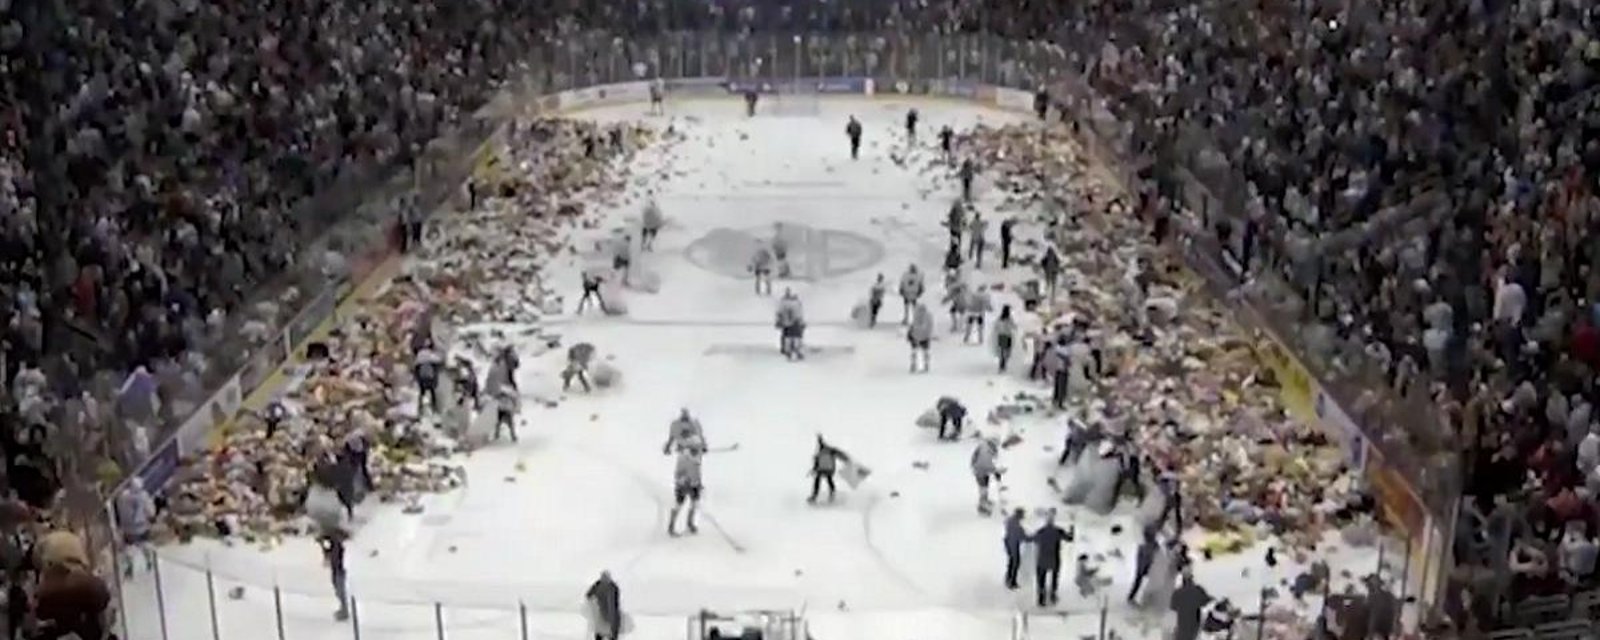 Fans go all out for a crazy Teddy Bear Toss on Sunday night!